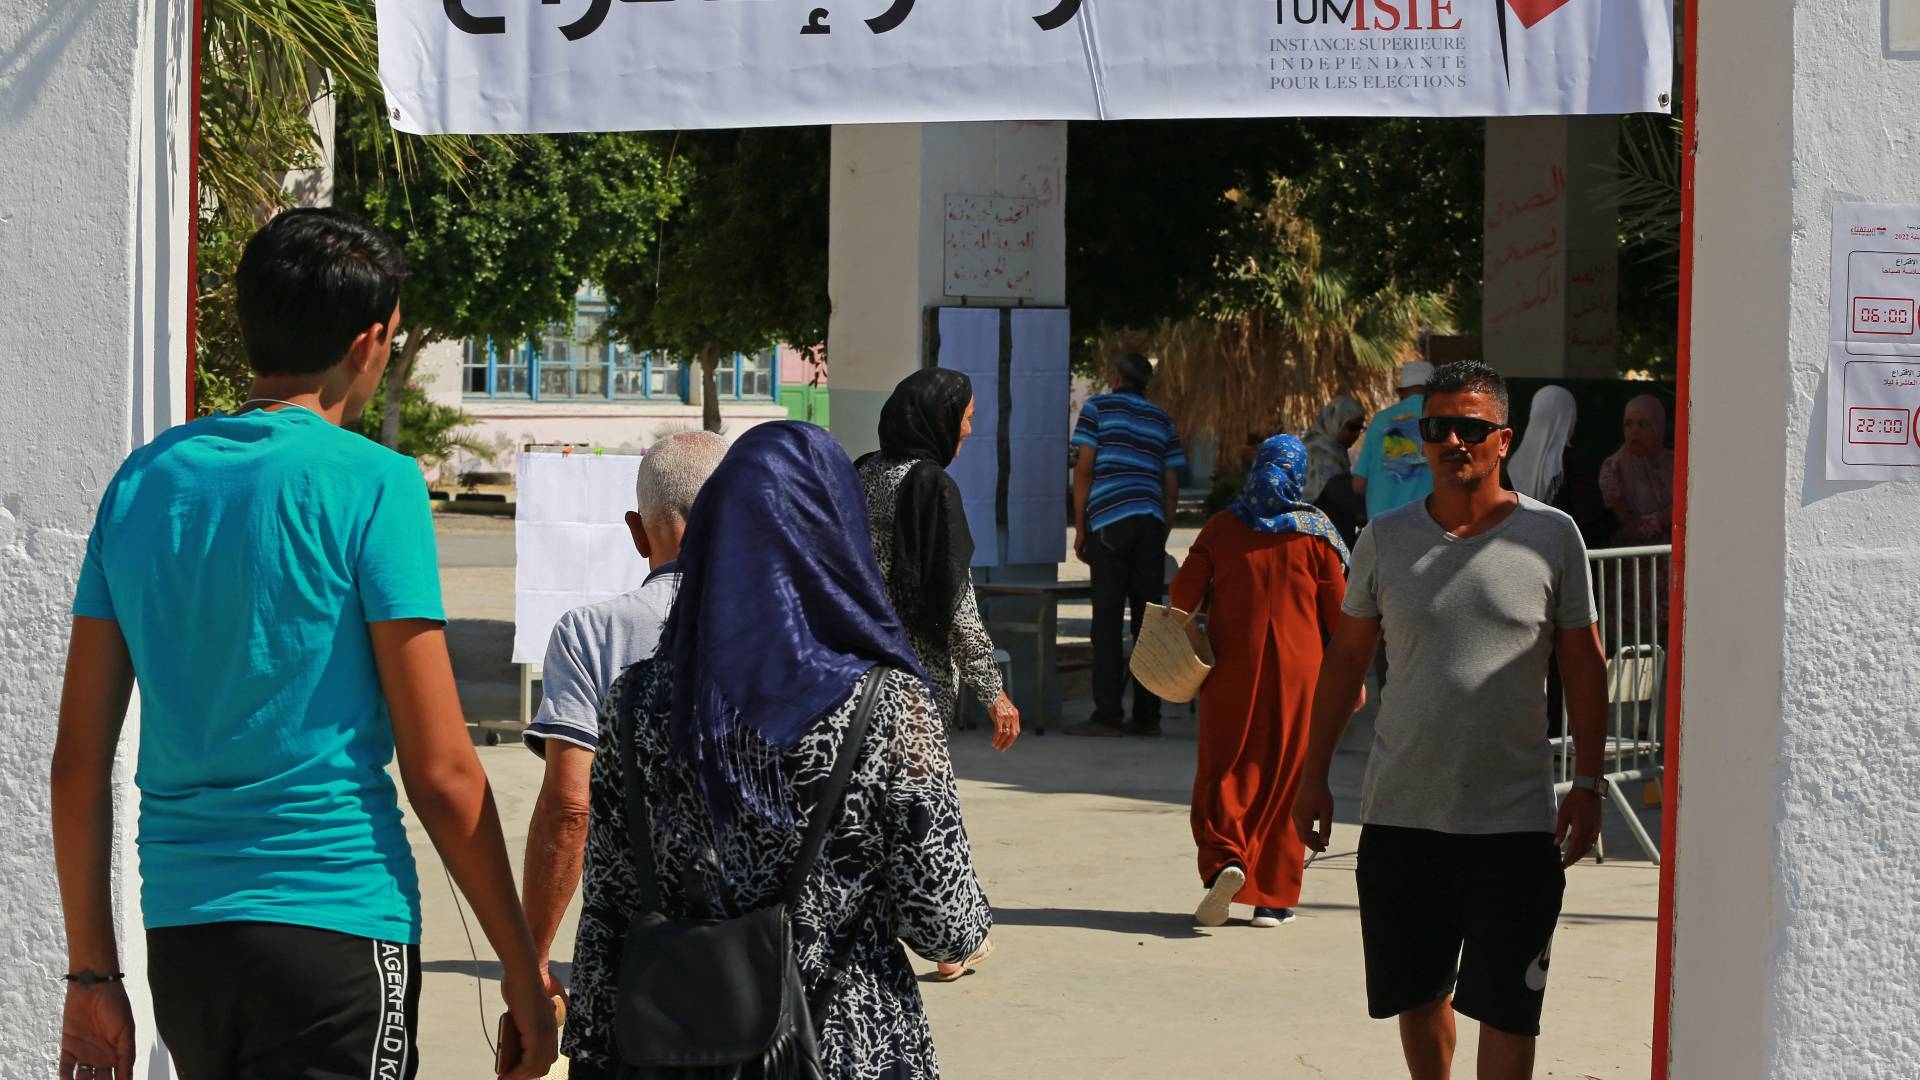 Tunisians arrive to vote in a referendum on a draft constitution put forward by the country's president, at a polling station in Ben Arous region near Tunis, on 25 July 2022.